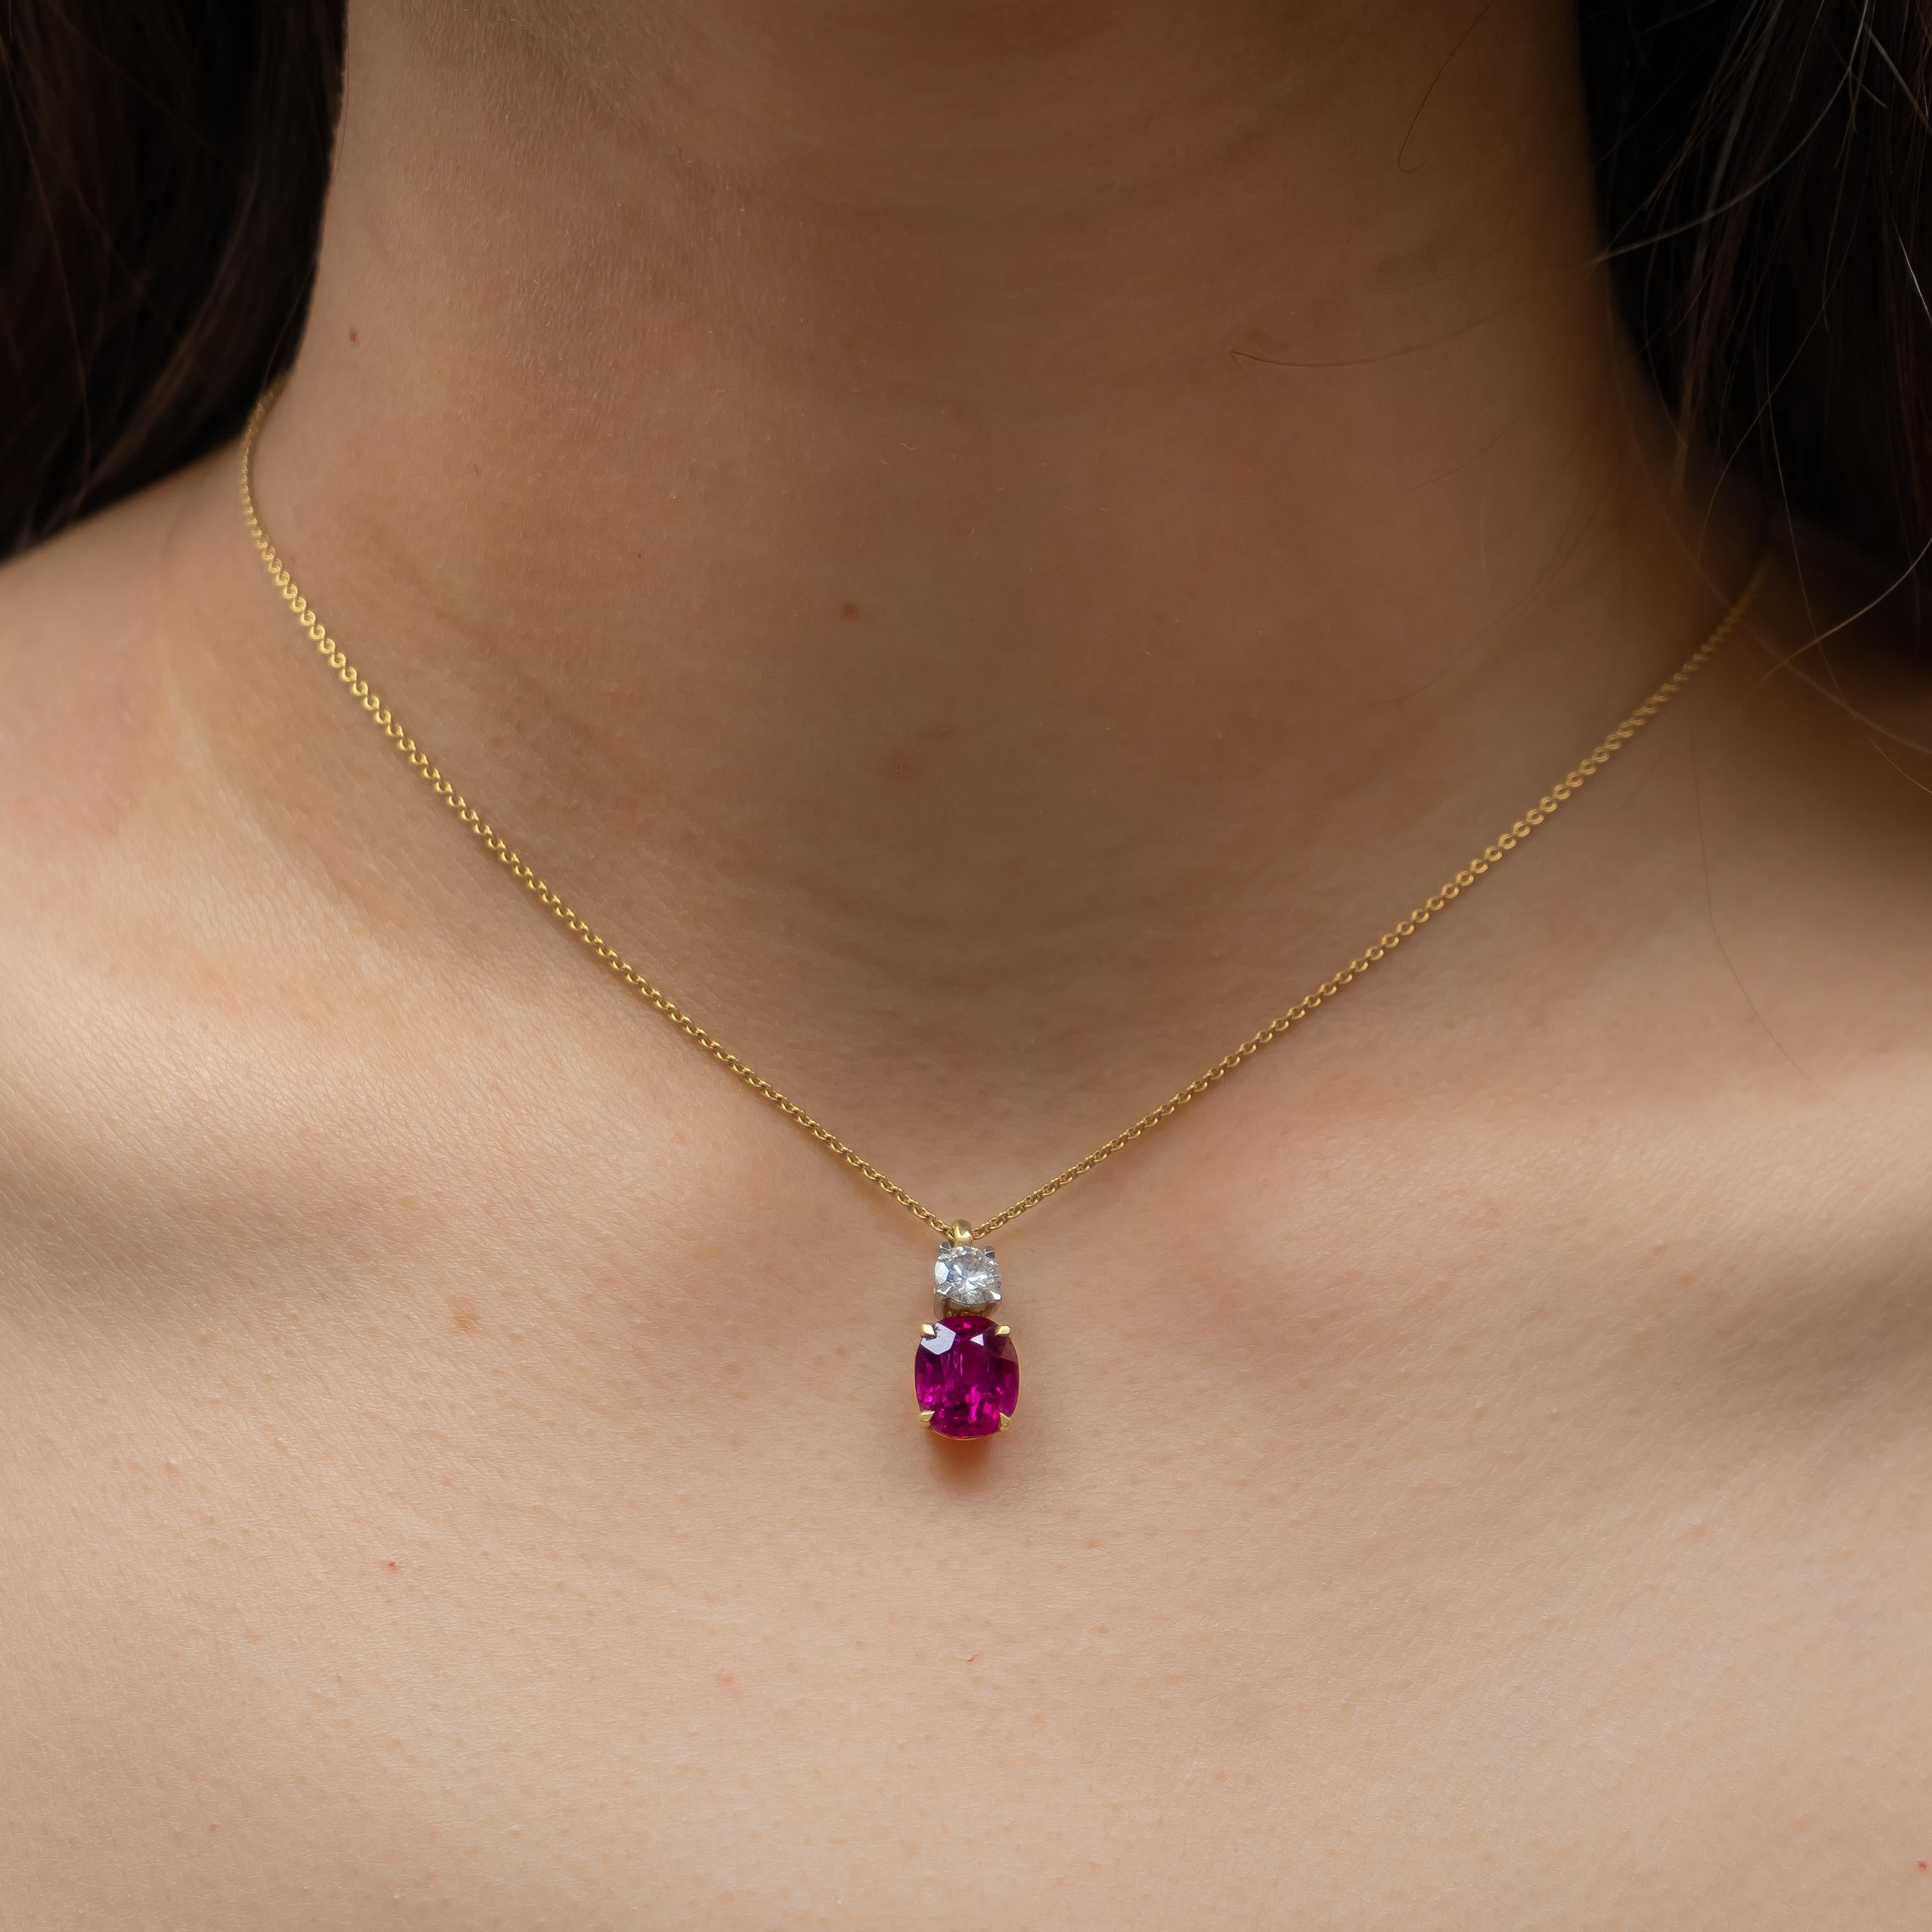 A ruby and diamond pendant, set with a 3.18ct cushion-cut faceted mixed-cut ruby, with a 0.40ct F VVS1 round brilliant-cut diamond, mounted in 18ct white gold, with a 16